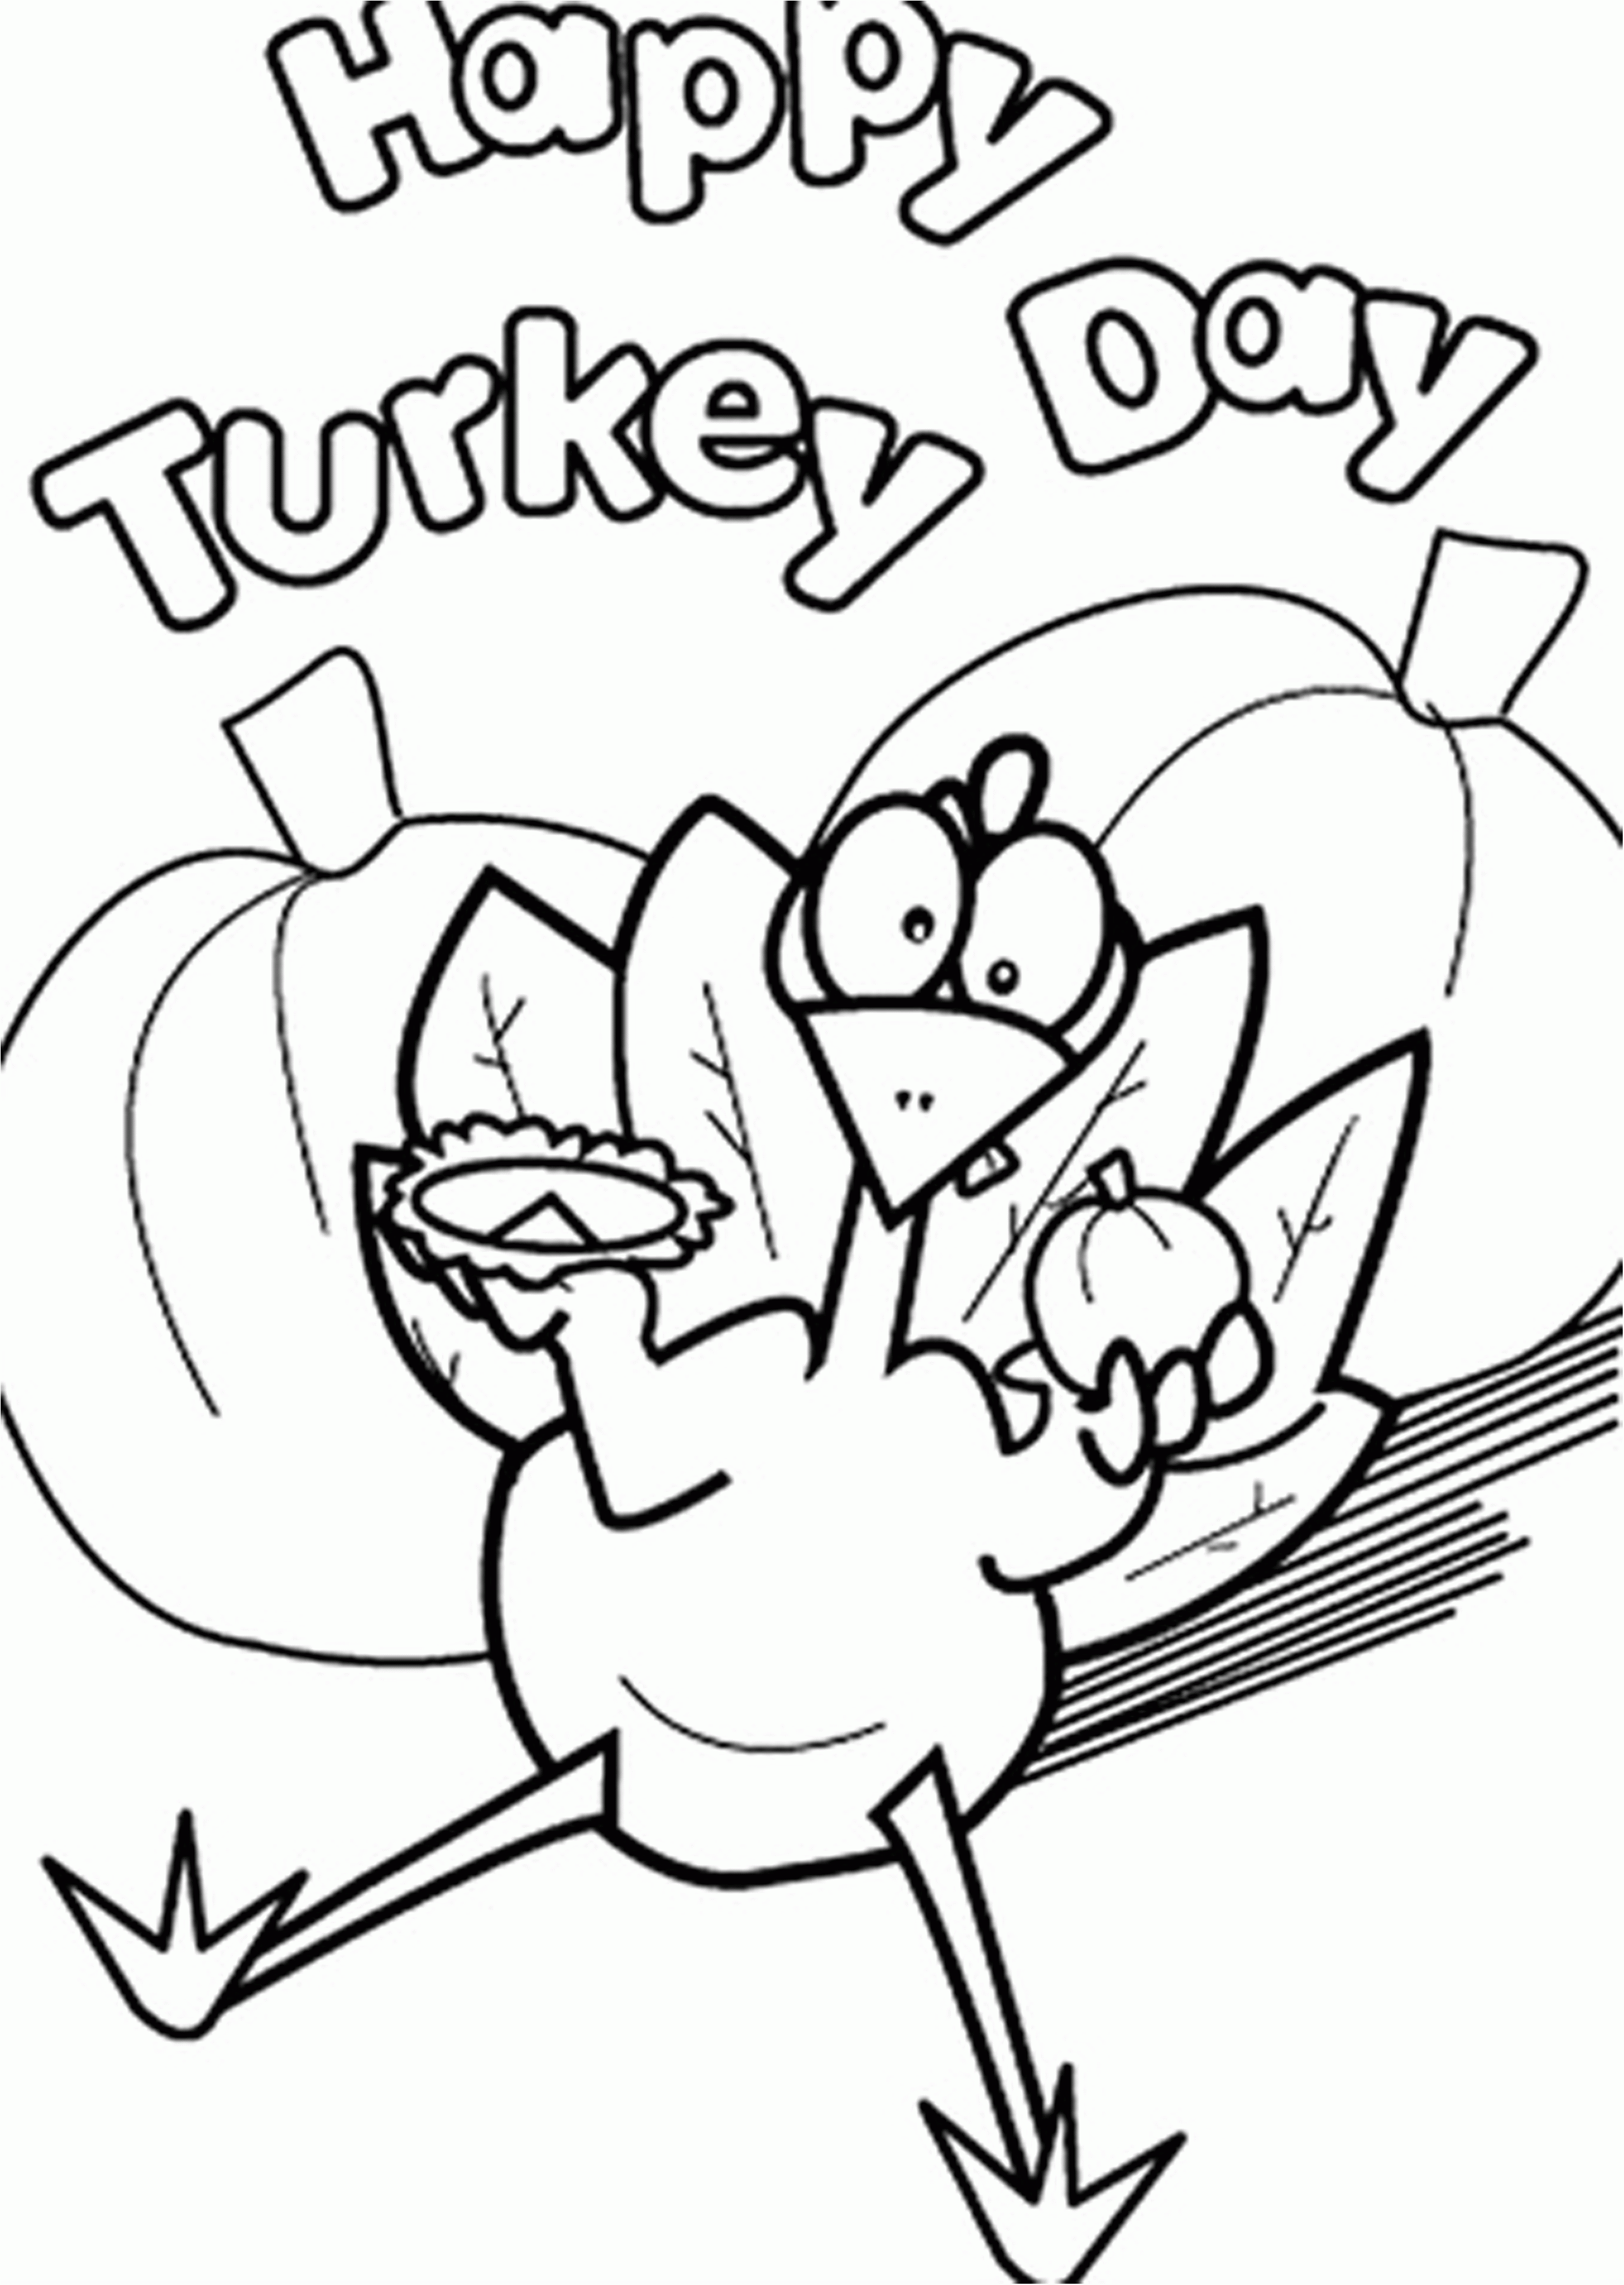 marvelous Christian Thanksgiving Coloring Pages – free bible coloring pages for thanksgiving